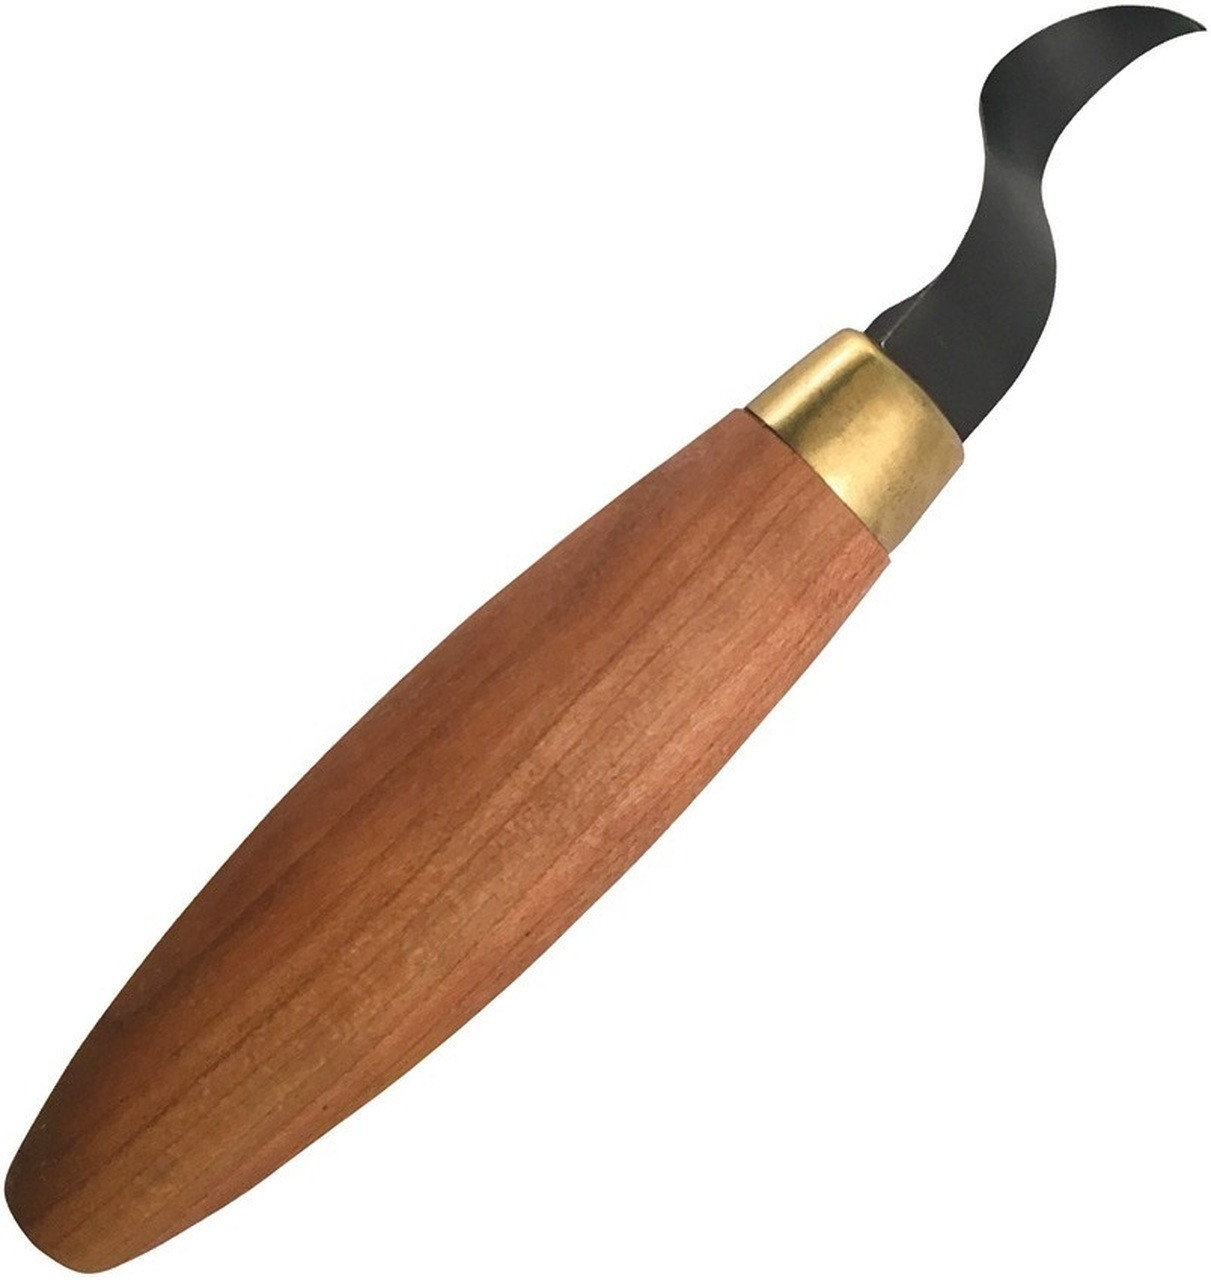 Better Tools Hook Knife with wood handle